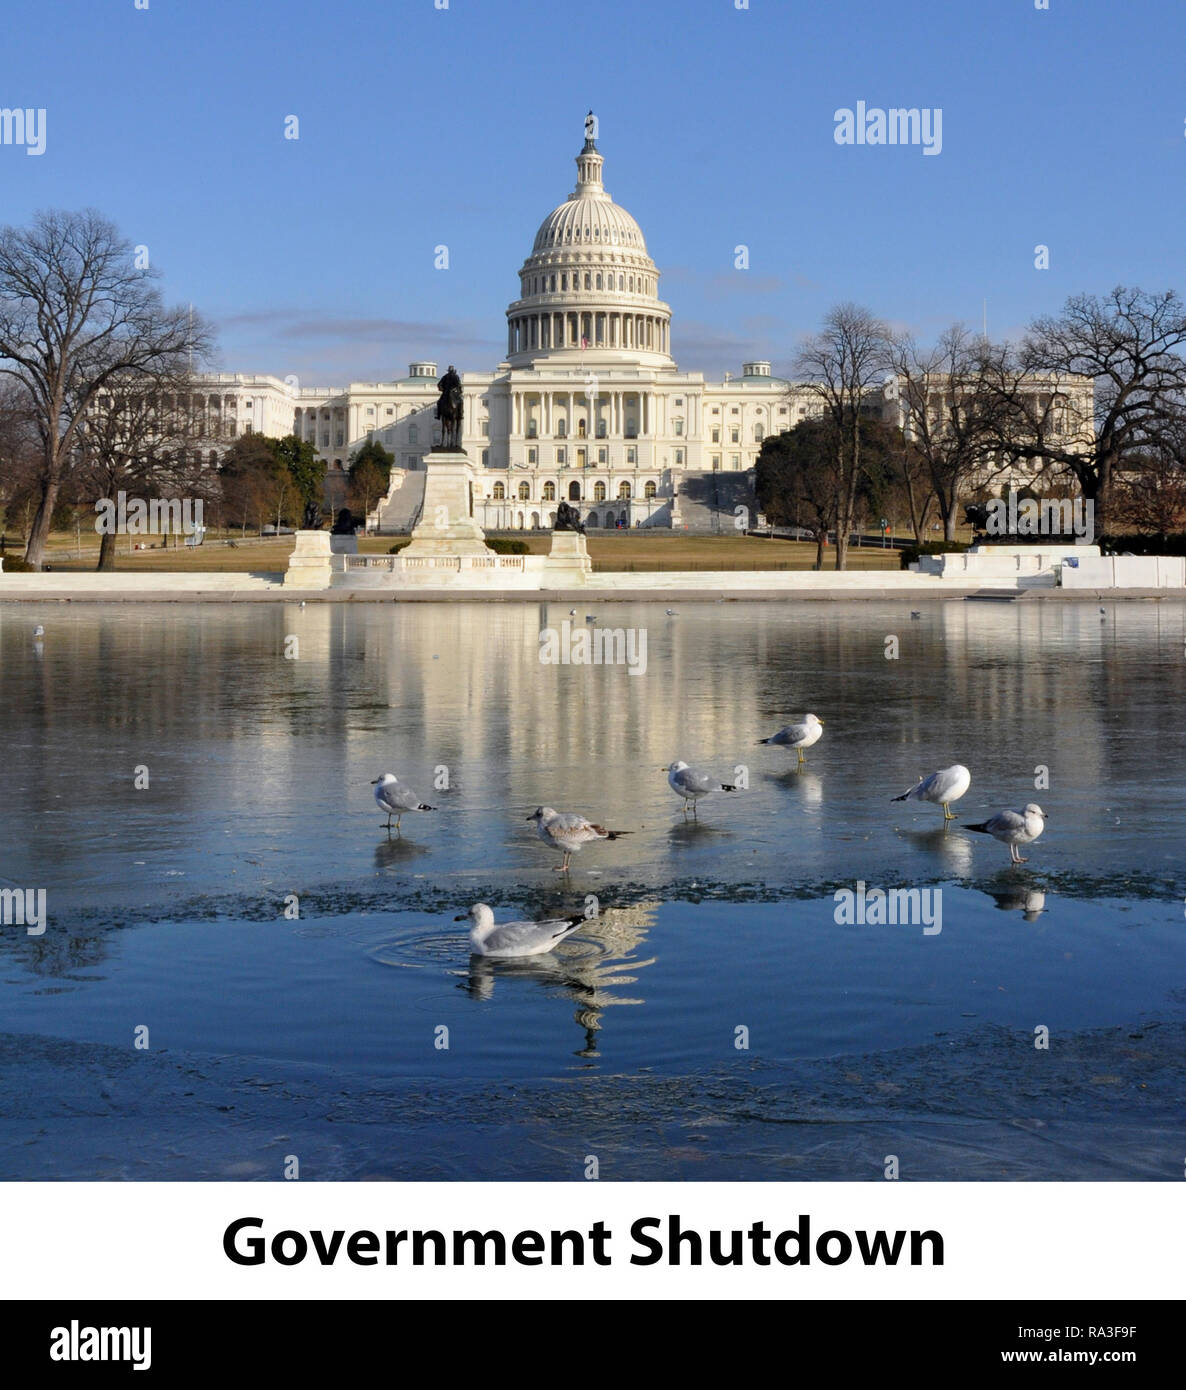 Frozen Government Shutdown, Political Satire showing the US Capitol with Frozen Reflecting Pool and Seagulls, Washington DC, Winter January 15, 2018 Stock Photo